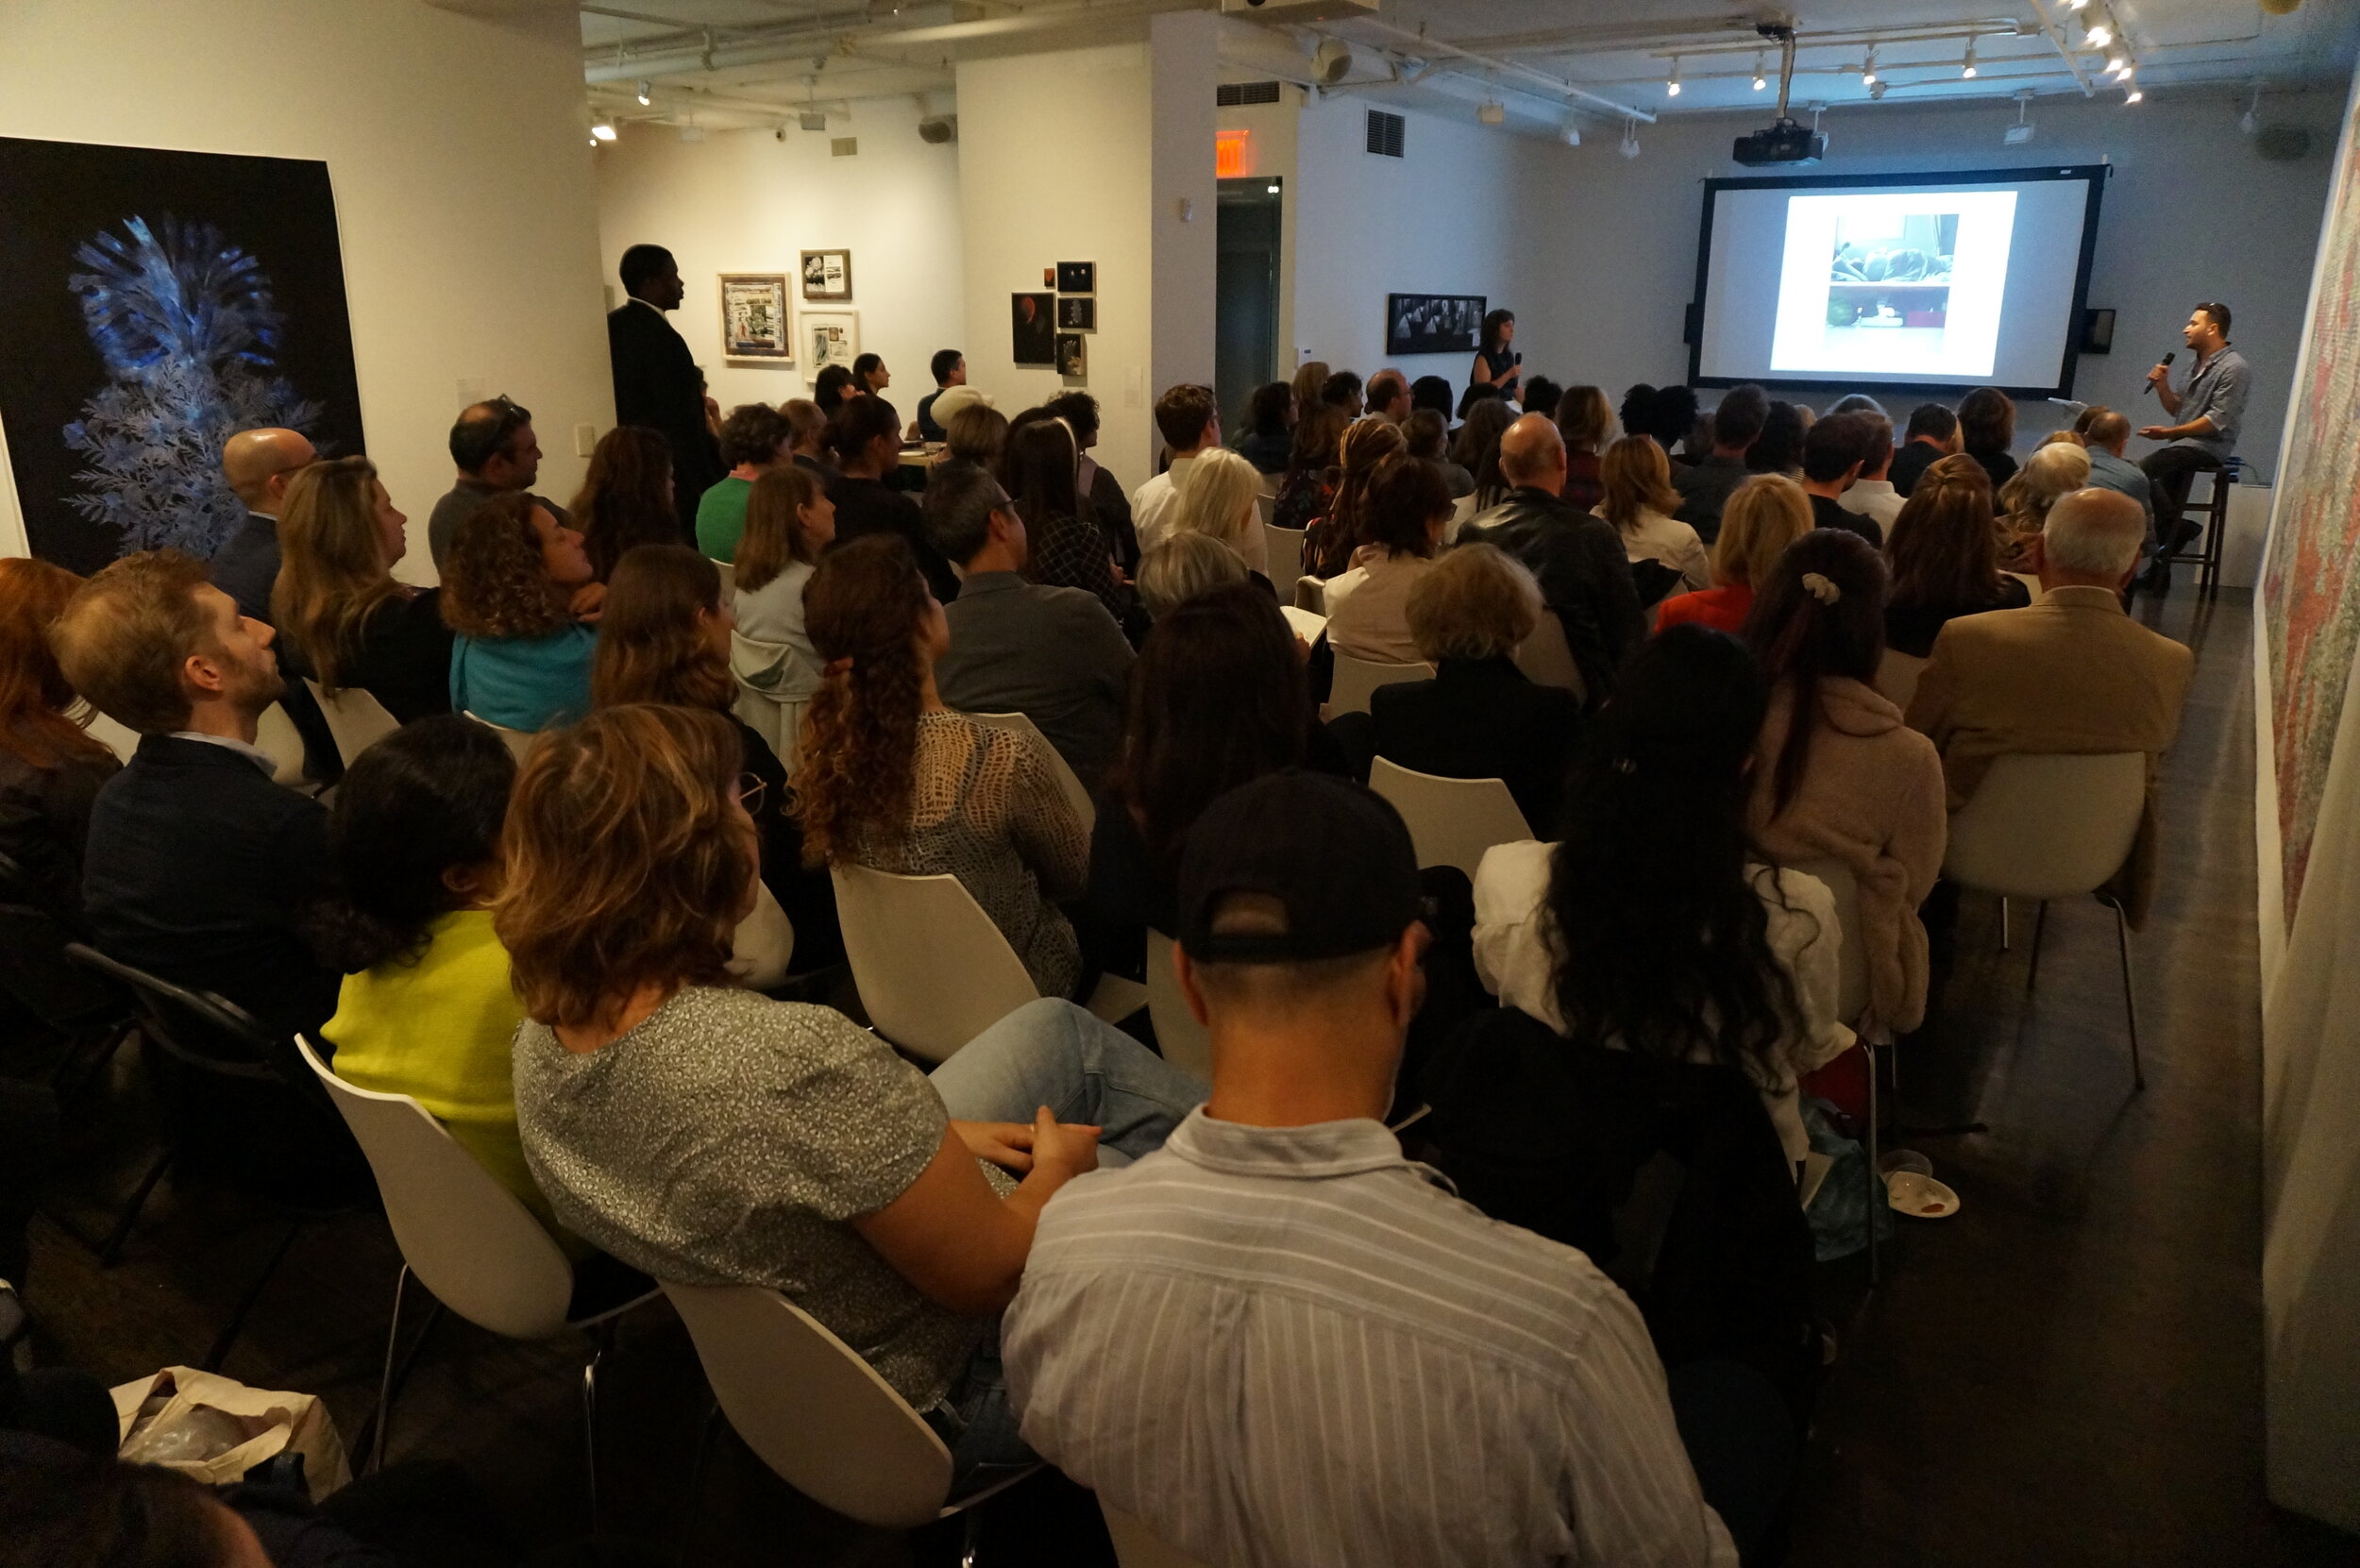  Artis,   The Nation’s Groves,  Artist Talk with Dor Guez, in Conversation with Sara Reisman Wednesday, September 18, 2019 